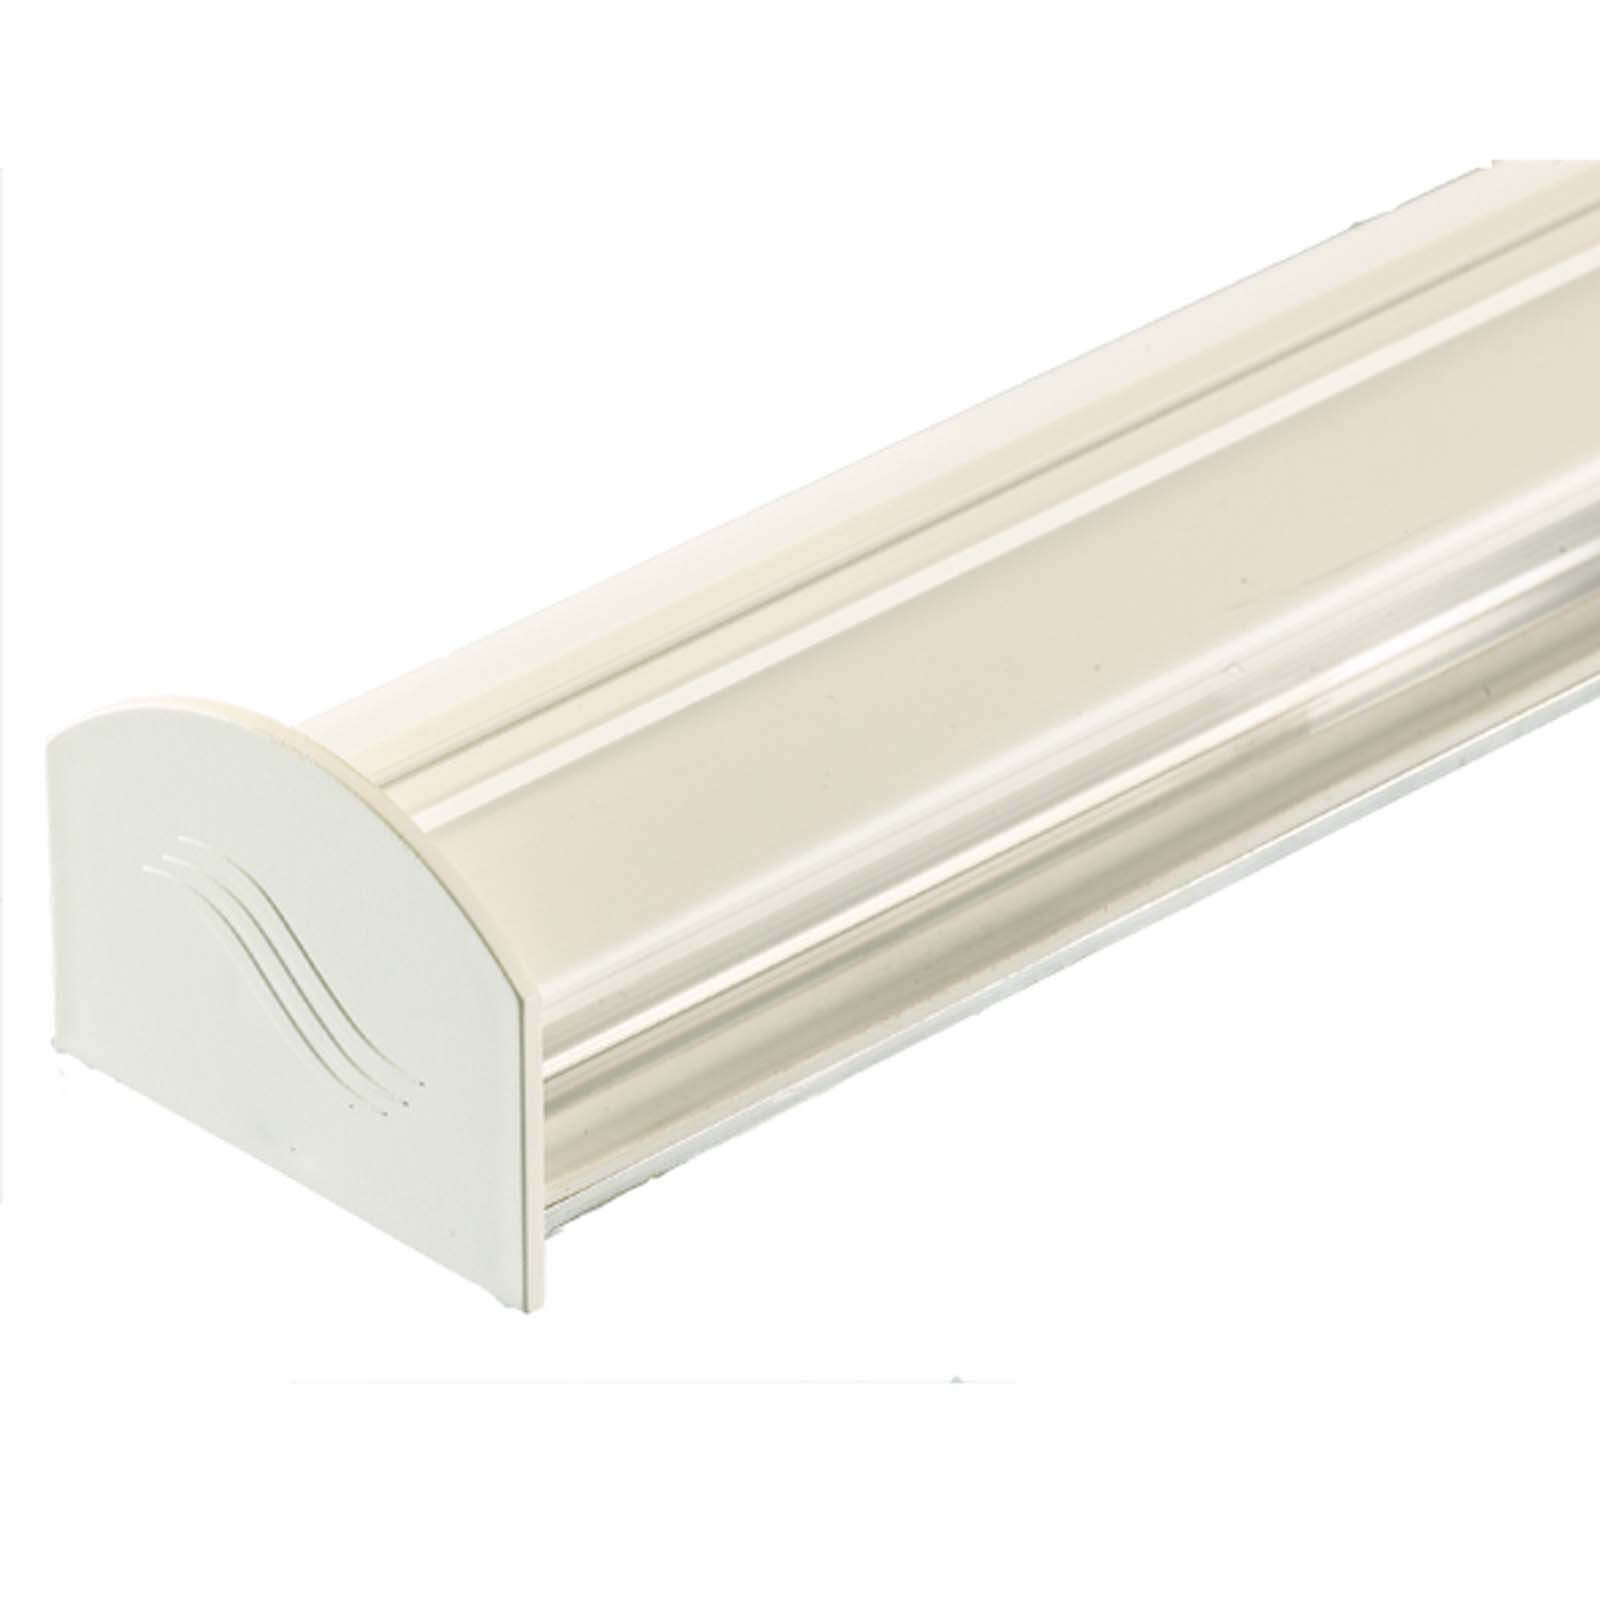 Photo of Corotherm 3m White Rafter Glazing Bar Kit - Pack 1